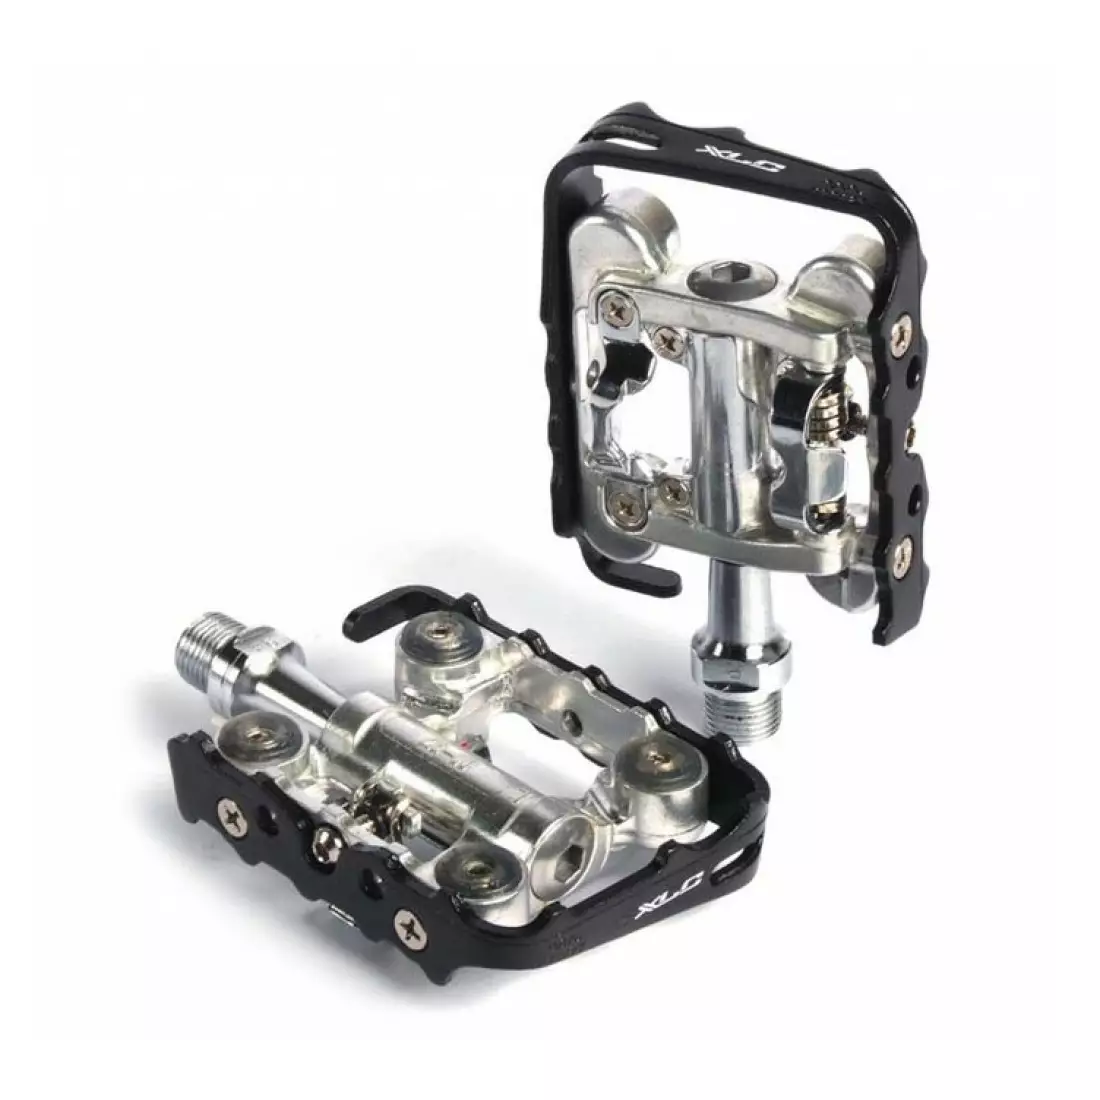 XLC PD-S02 MTB/trekking bicycle pedals with cleats